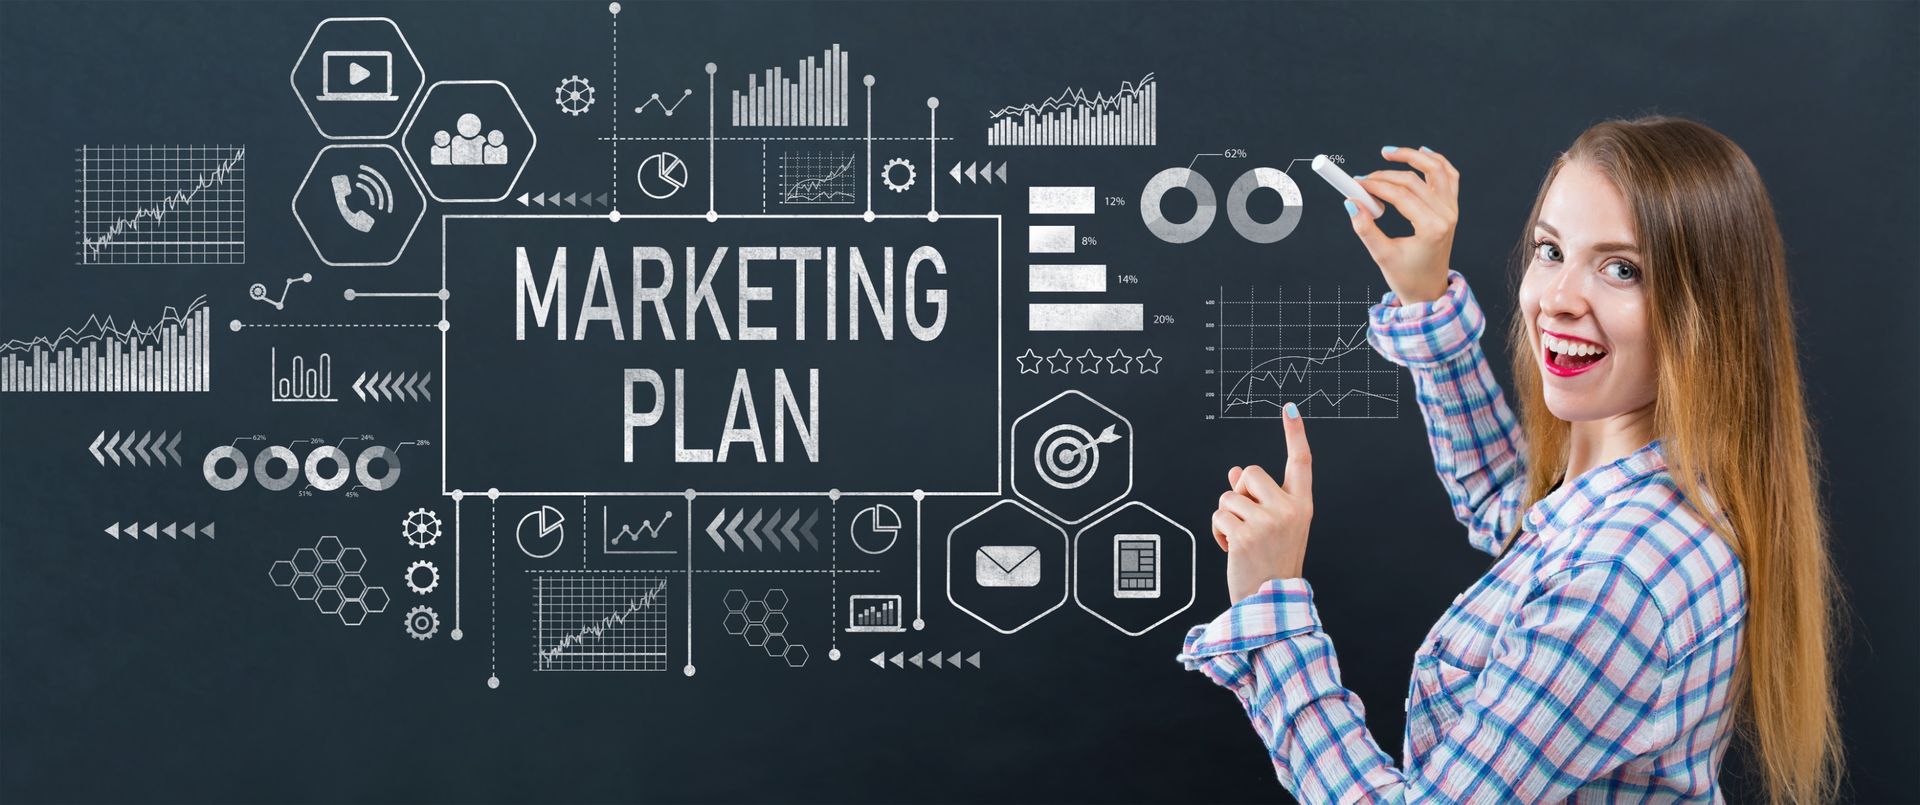 Tips for a Business Marketing Plan